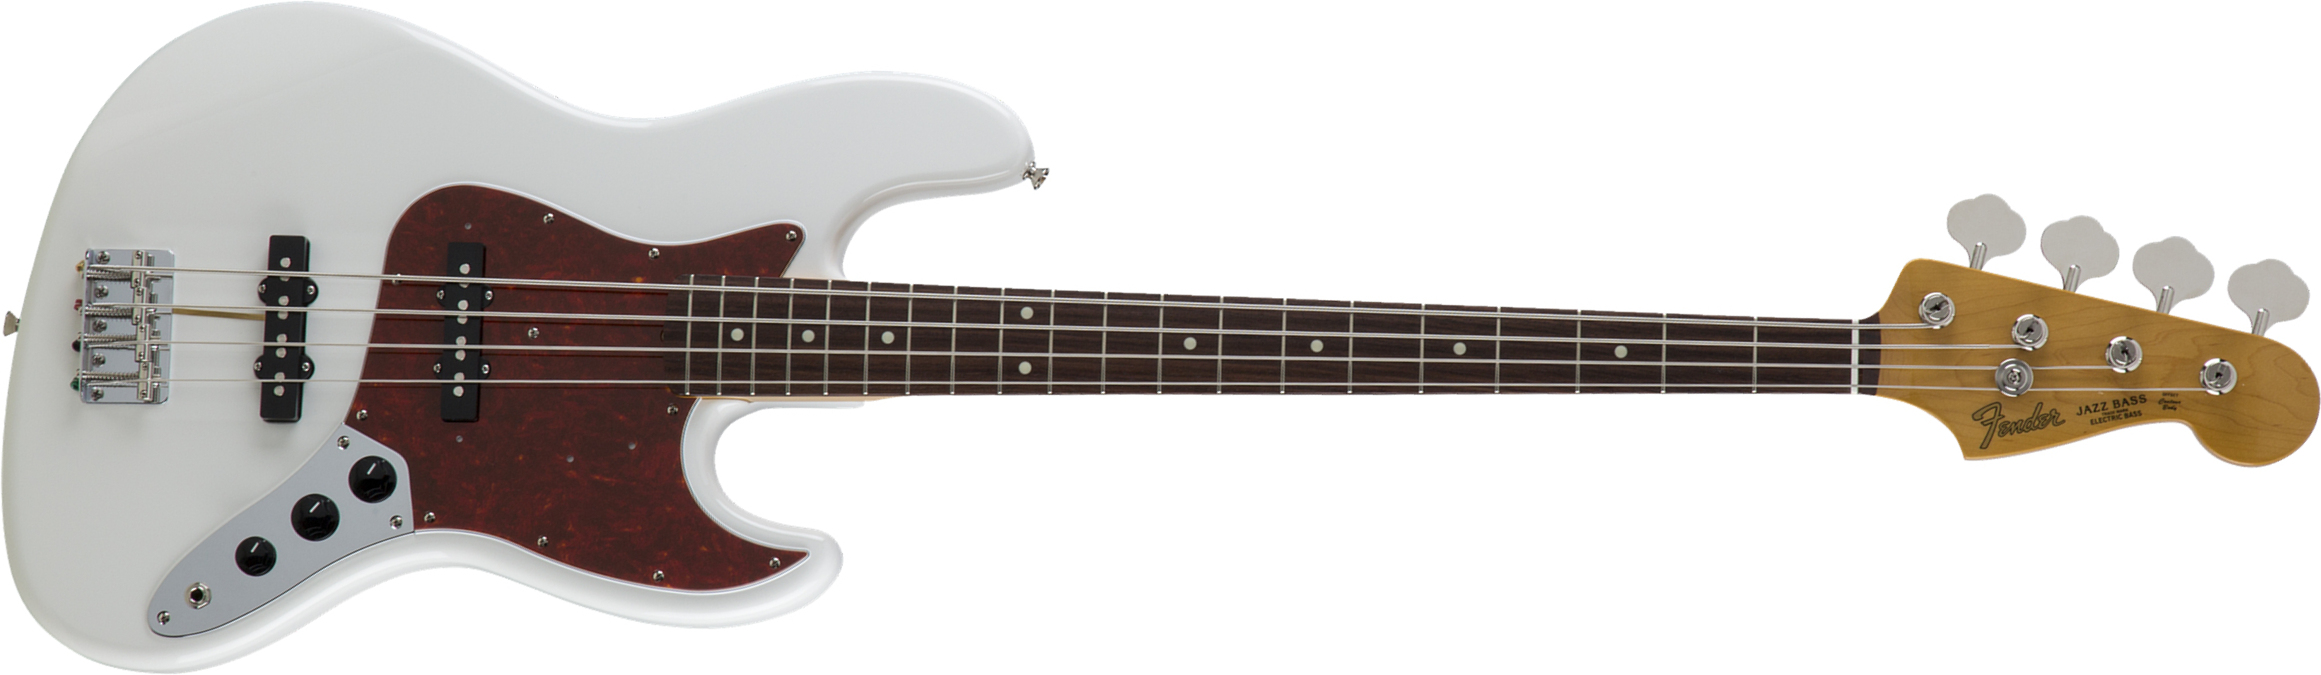 Fender Jazz Bass Traditional Ii 60s Jap 2s Trem Rw - Olympic White - Solid body elektrische bas - Main picture